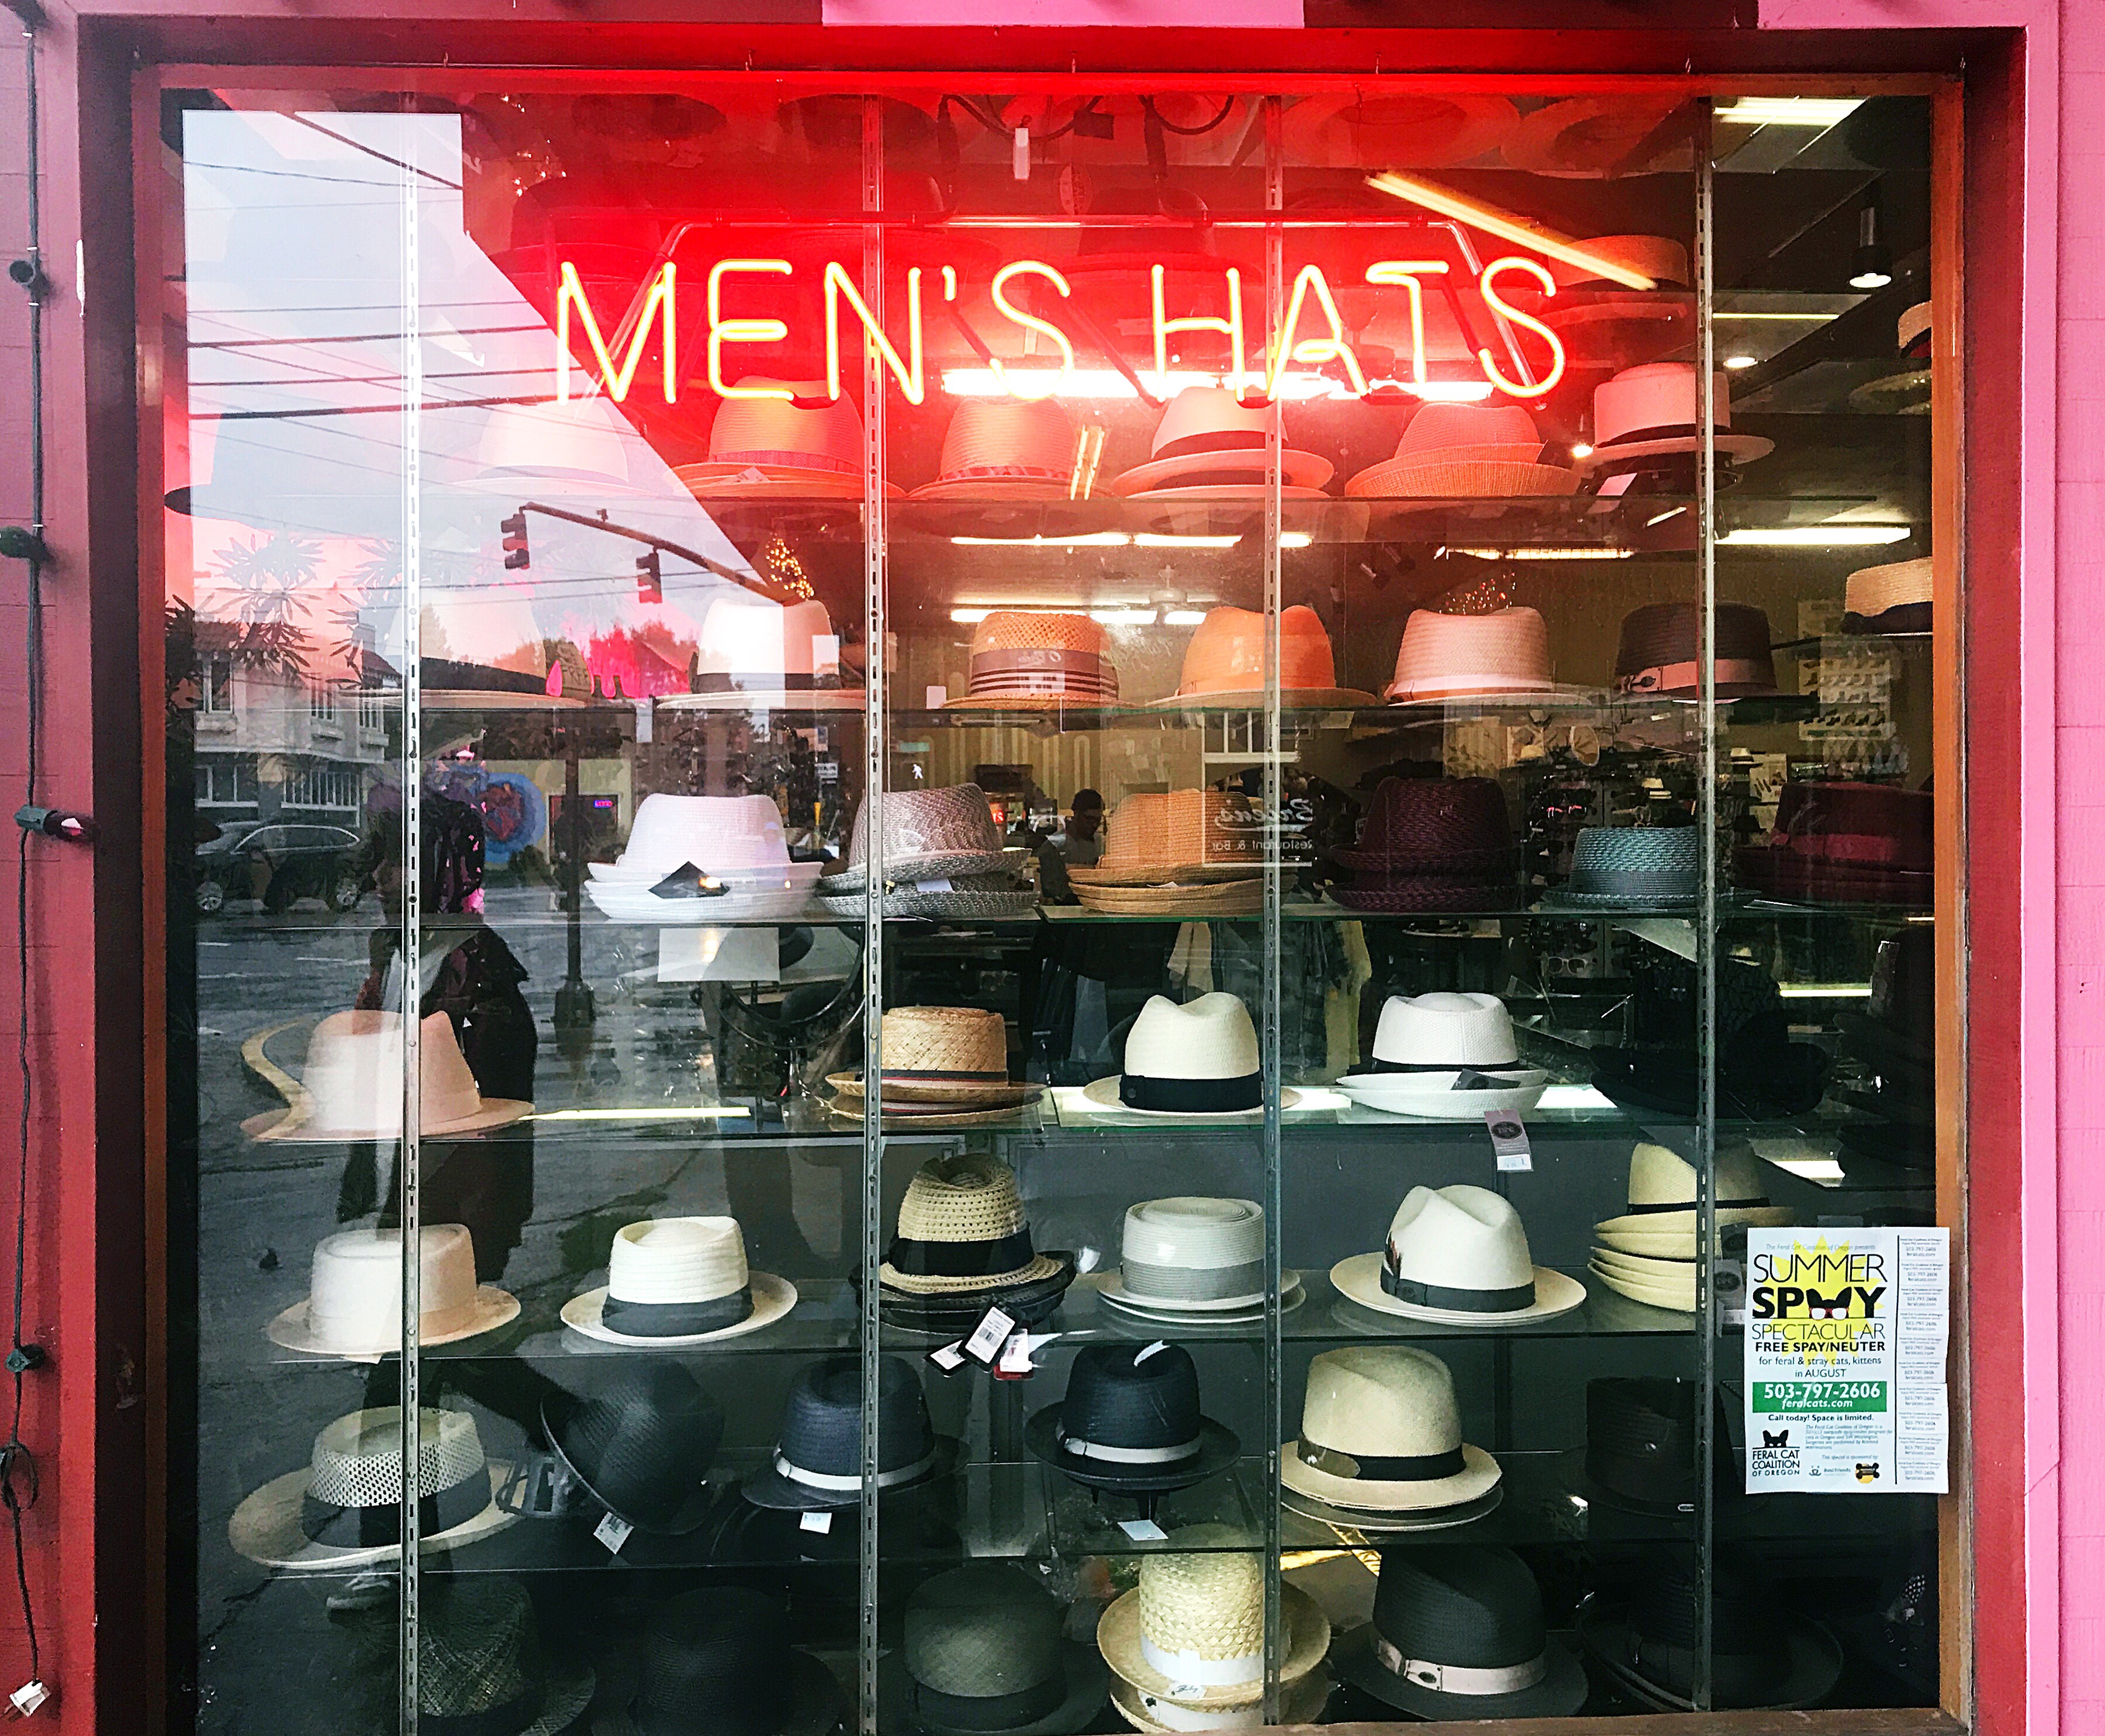 Neon sign for hats in city storefront